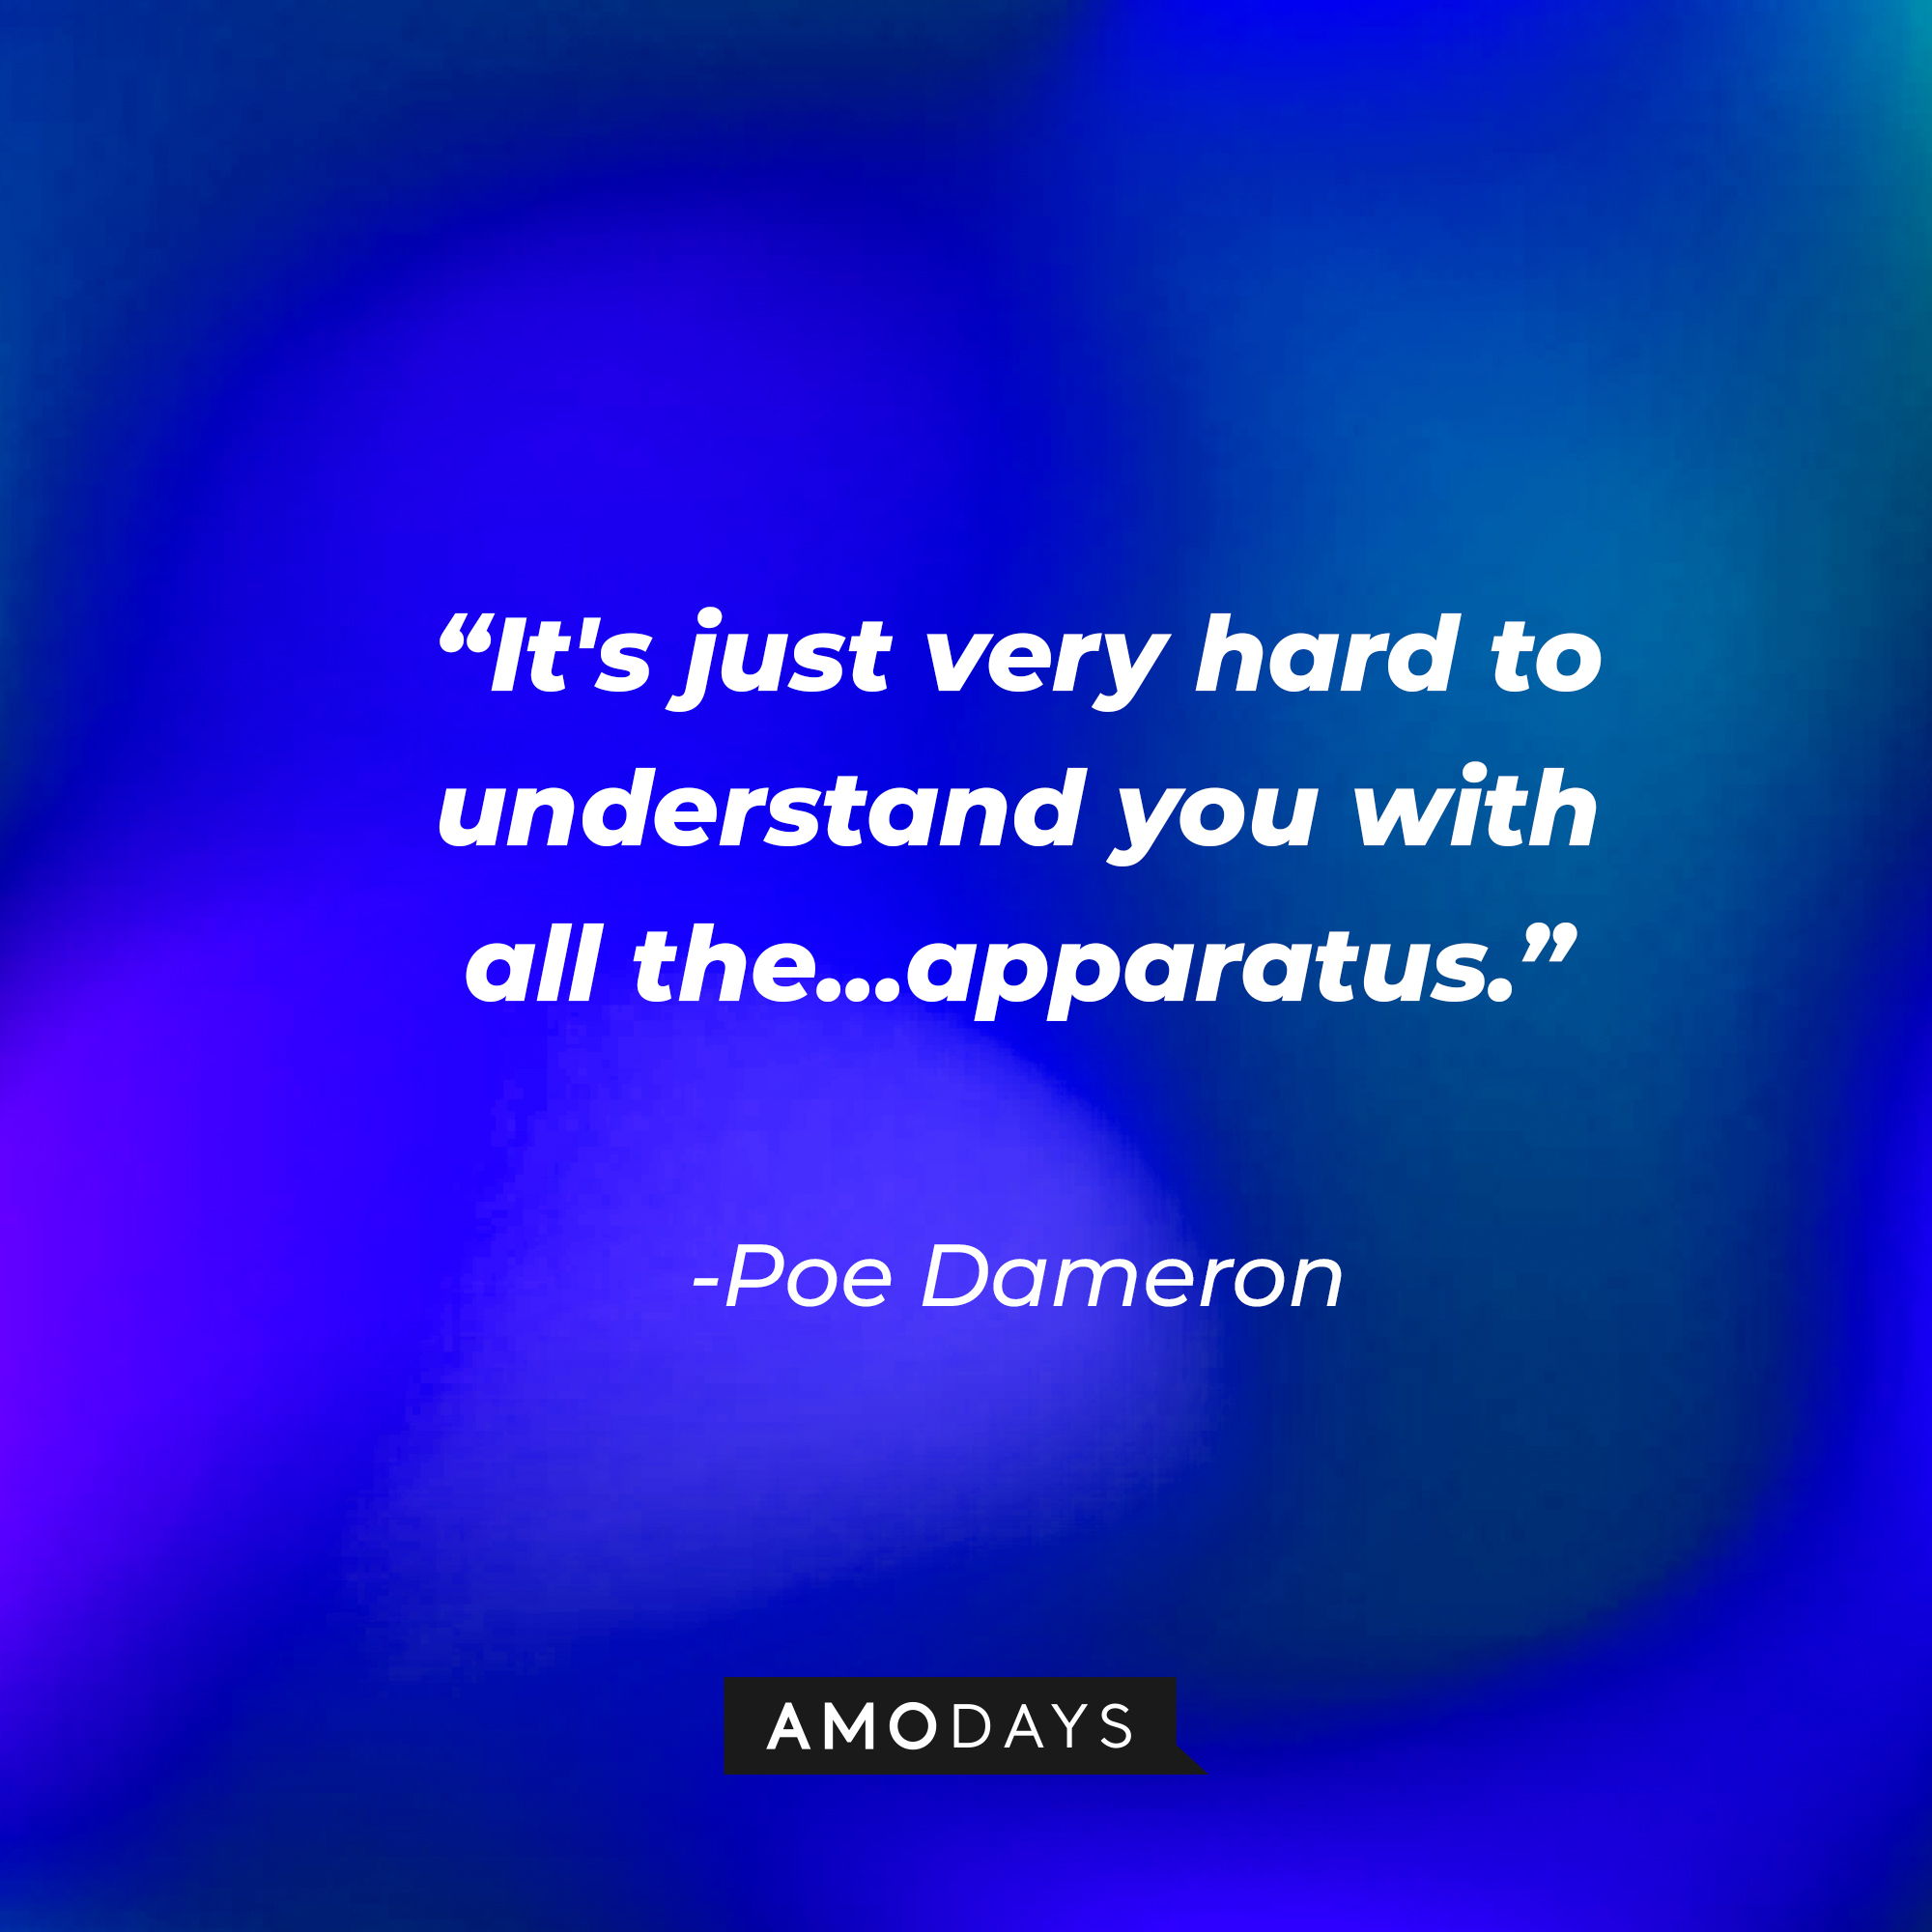 Poe Dameron’s quote: "It's just very hard to understand you with all the...apparatus." | Source: AmoDays